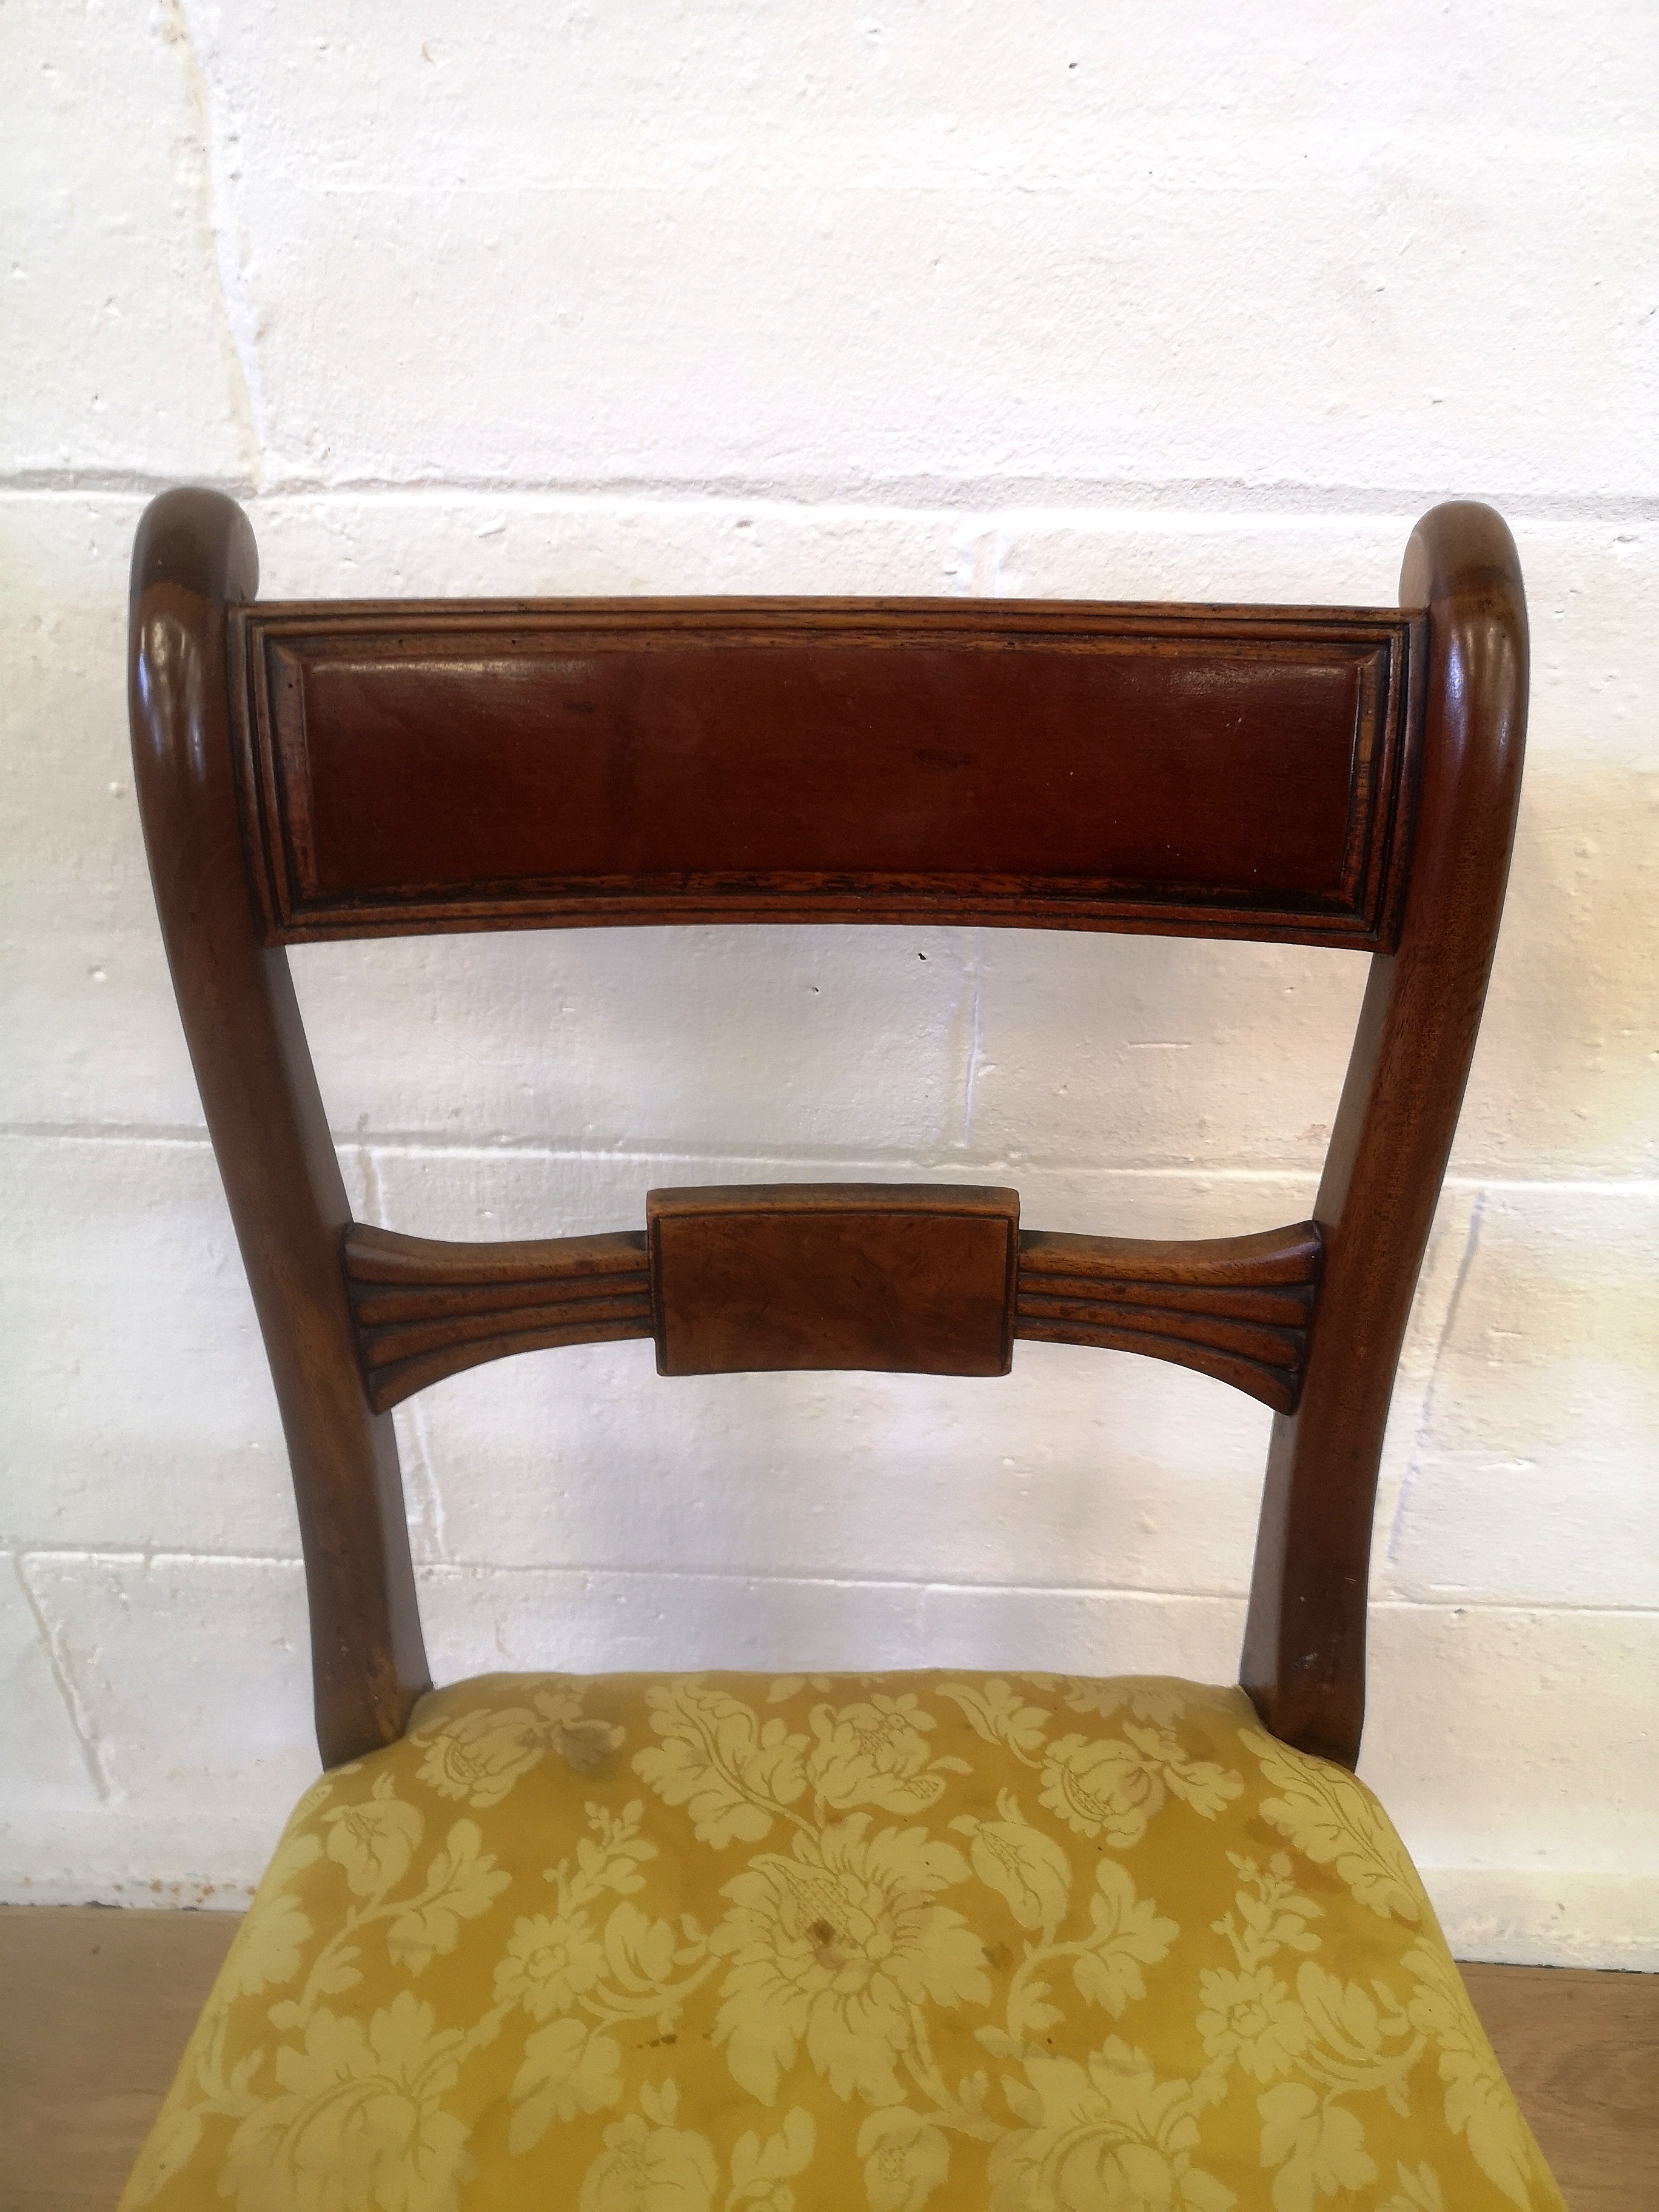 Two mahogany ladder back dining chairs - Image 5 of 6